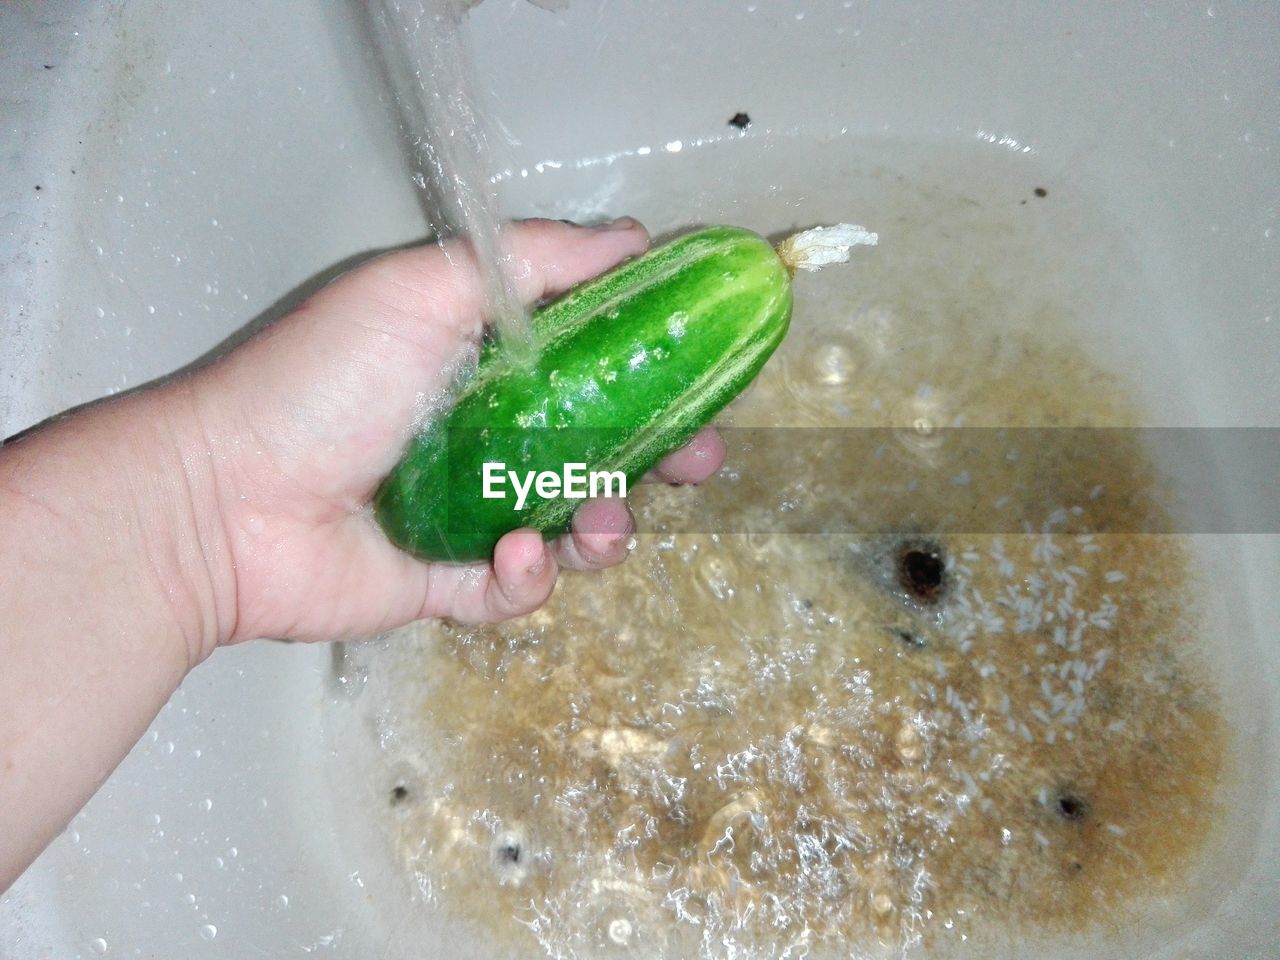 Cropped image of person washing a cucumber